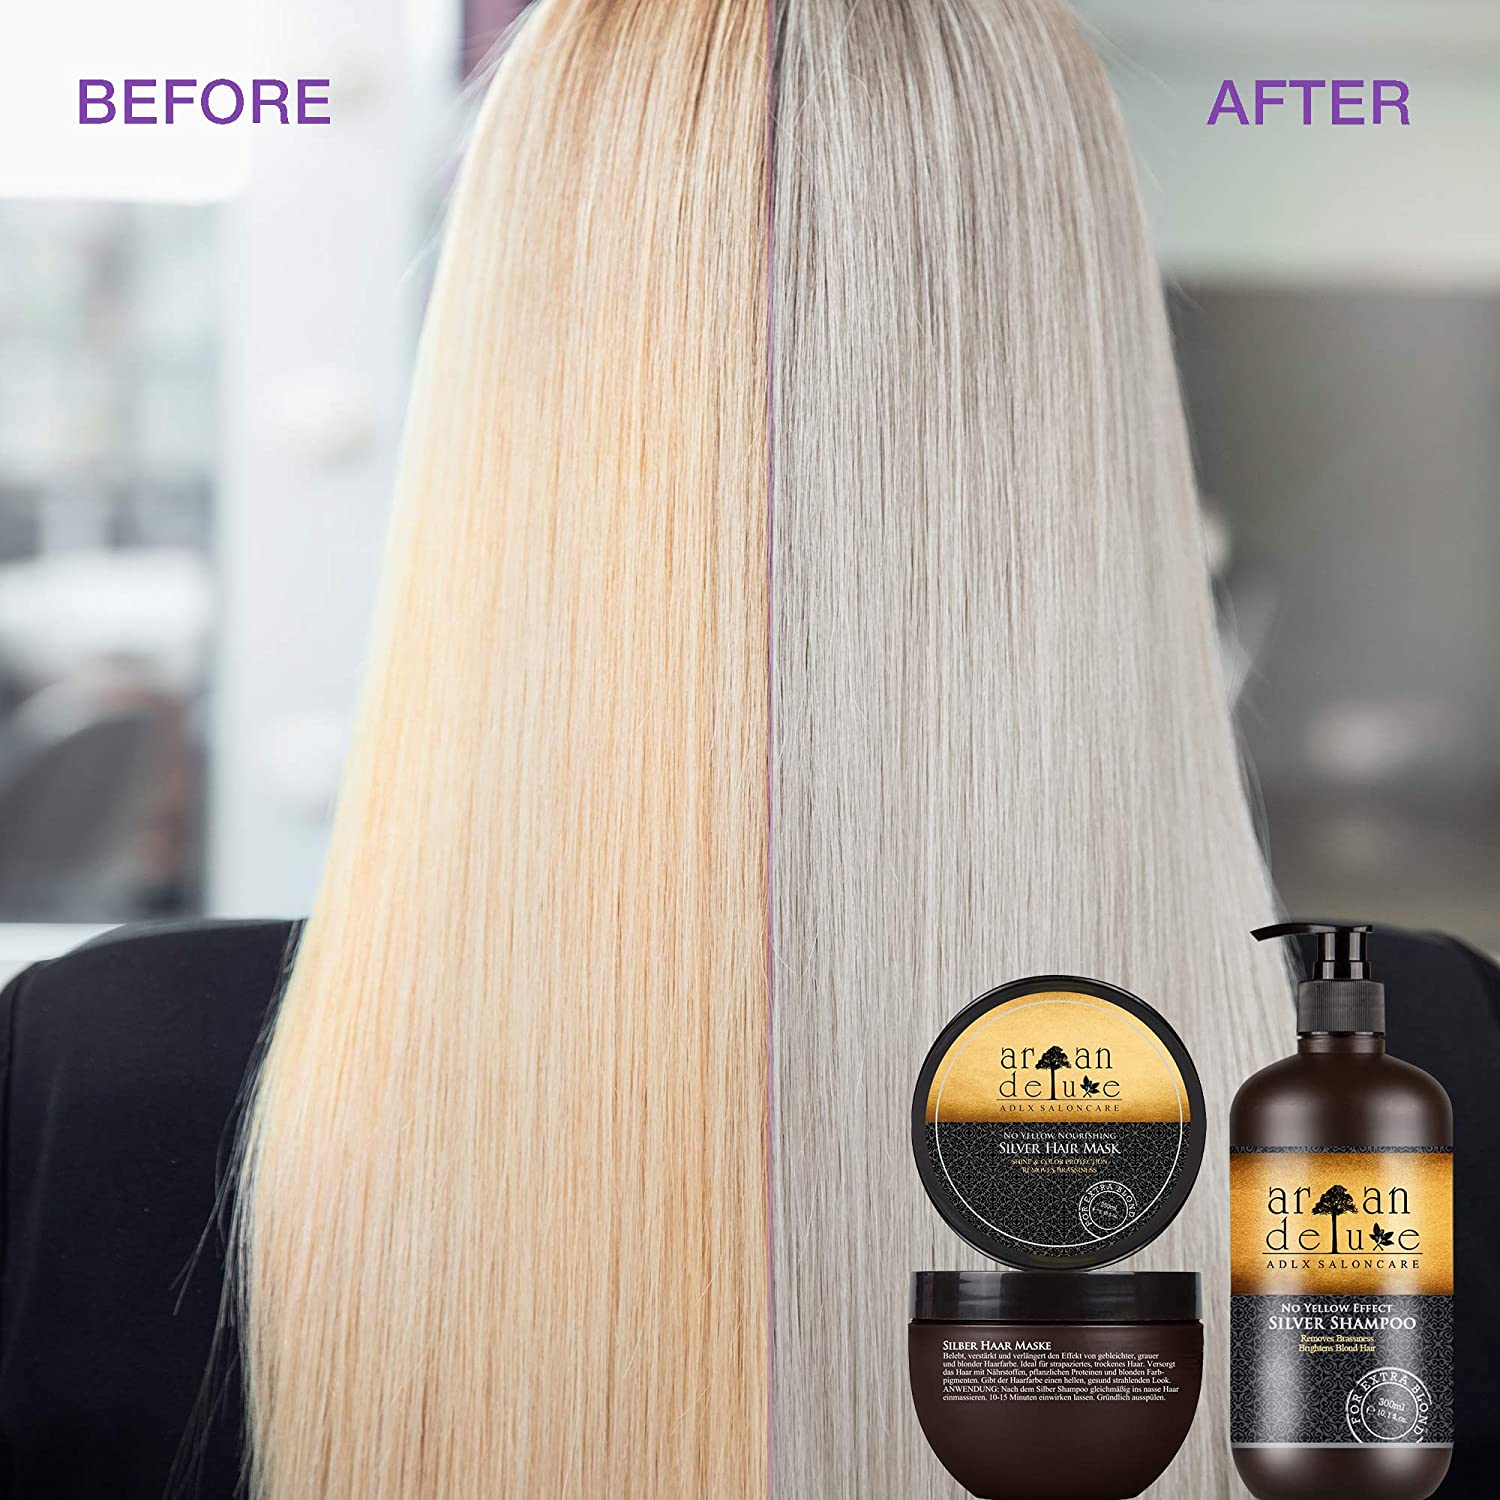 Argan Deluxe Professional Silver Shampoo before and after using shampoo, healthy hair